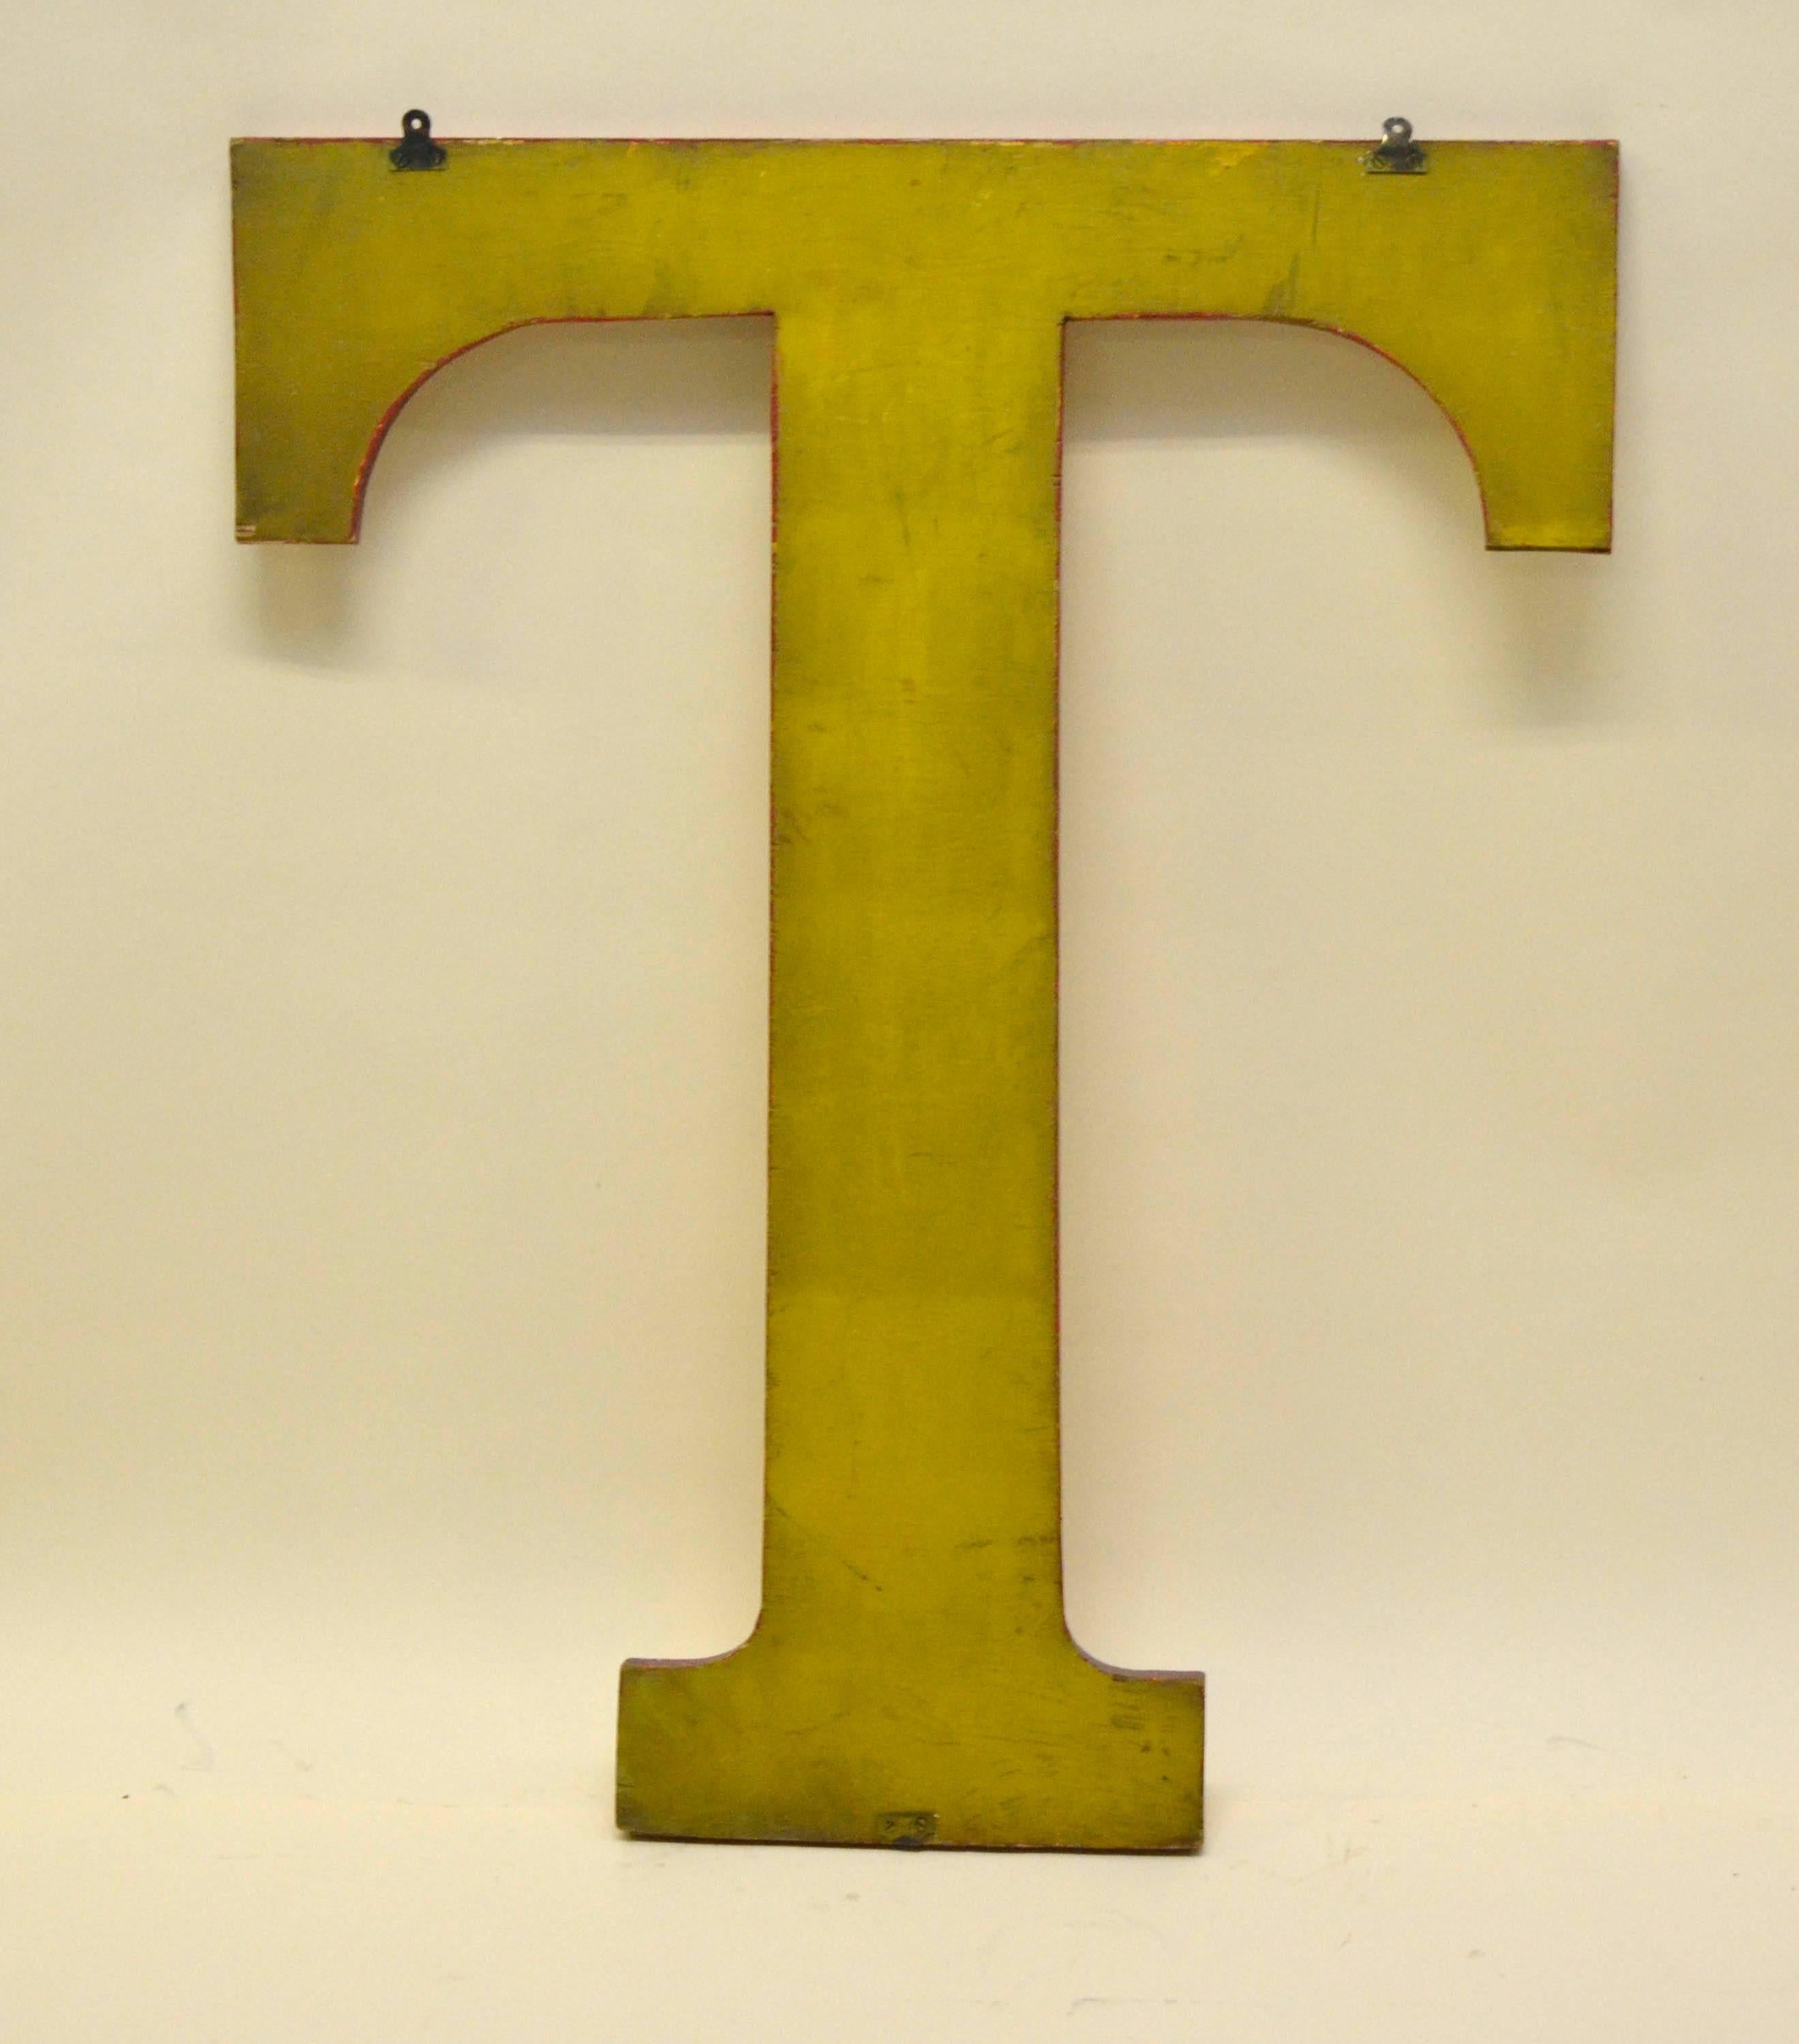 English 1960s Very Large Yellow Wooden Capital Letter T with Red Border Made in England